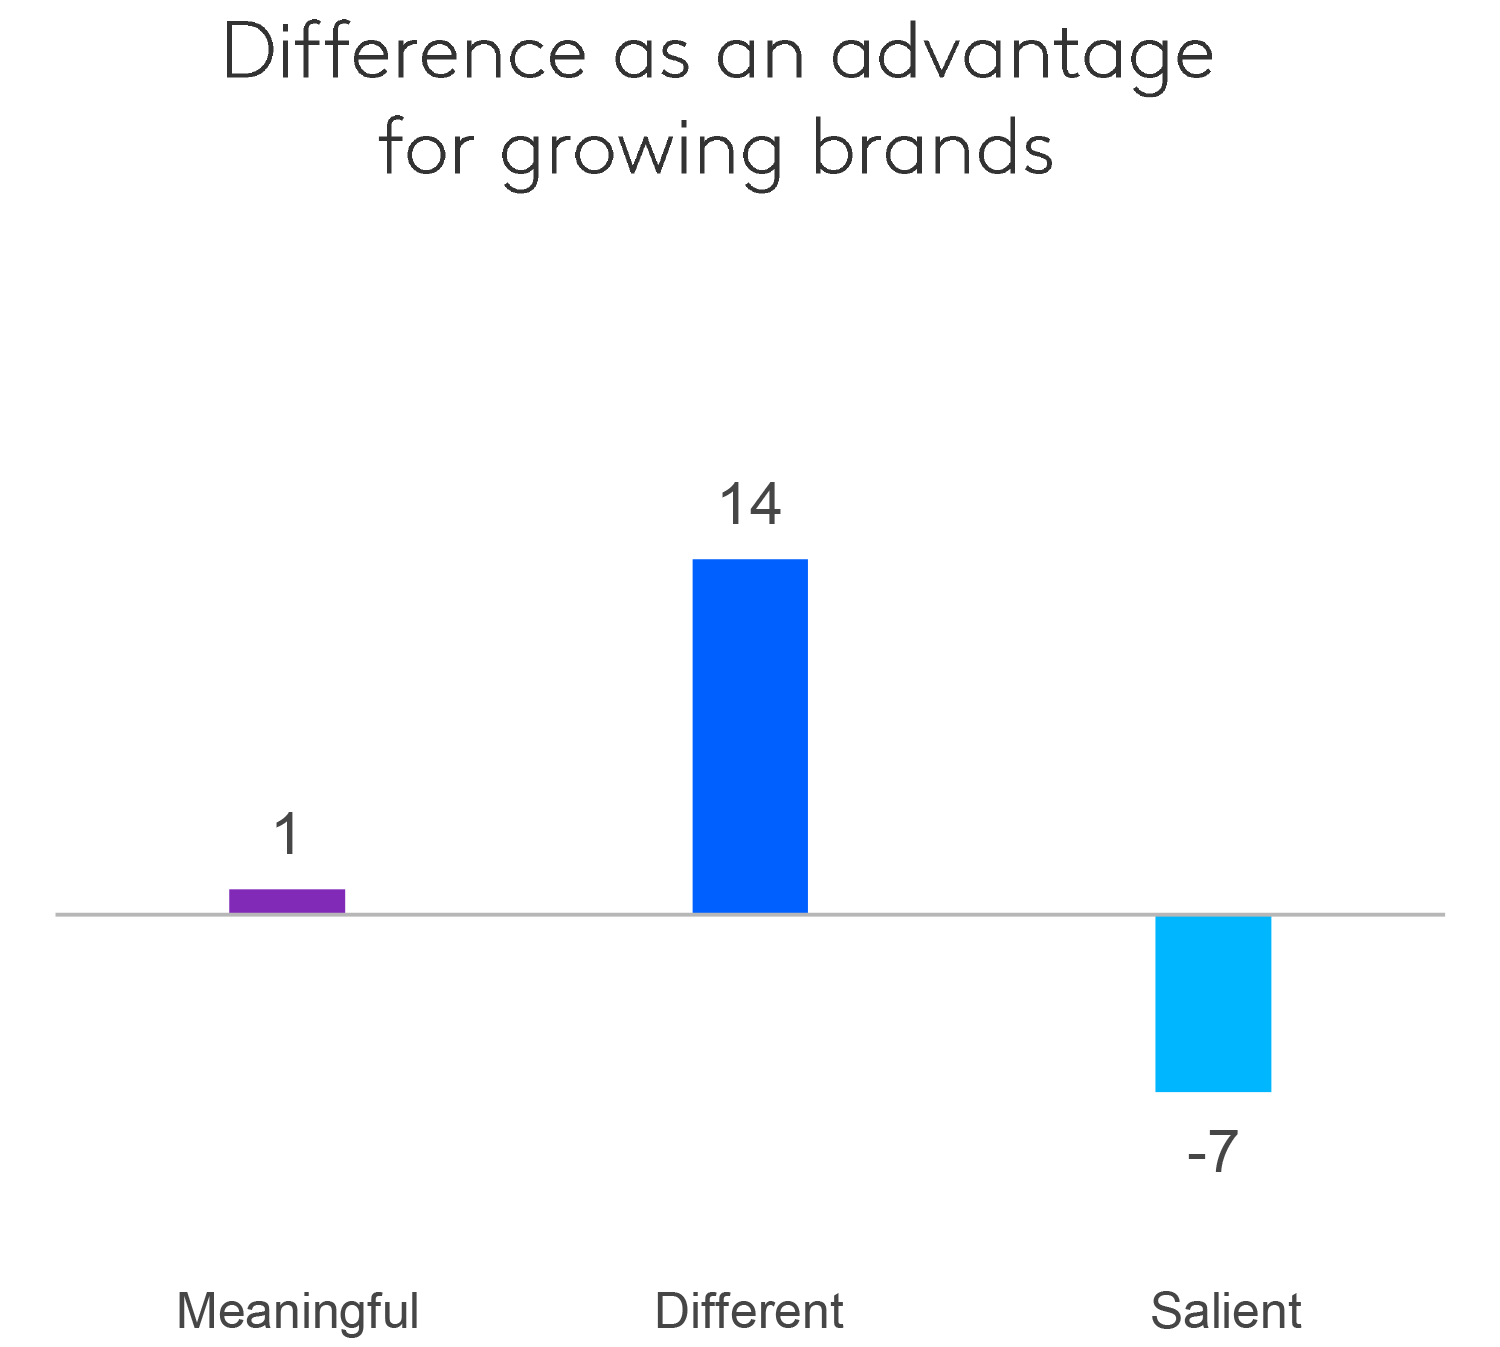 Difference as an advantage for growing brands